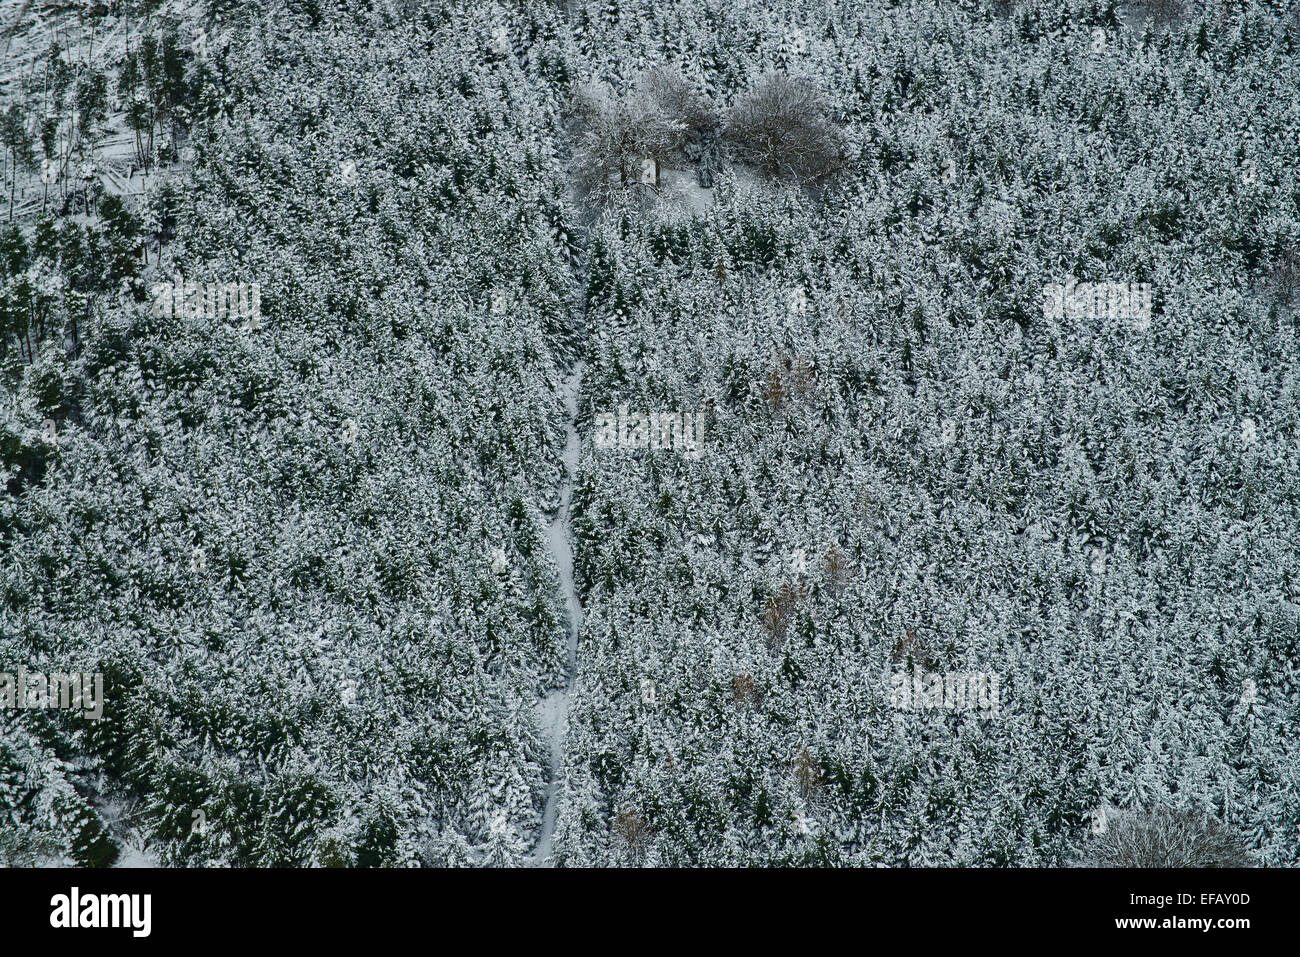 An abstract aerial view of a snowy forest in the Peak District of England Stock Photo